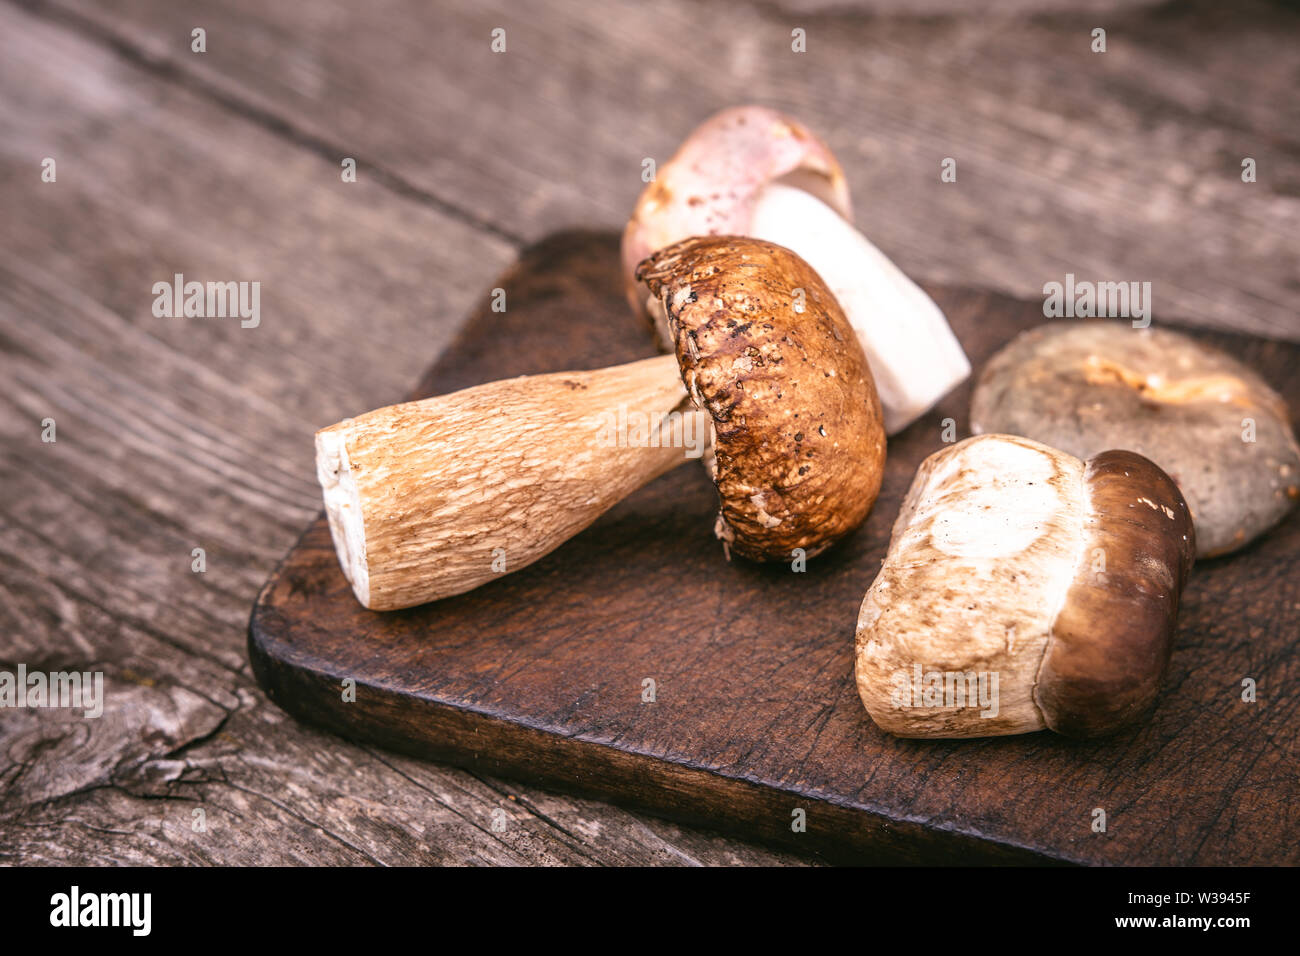 Delicious Types of Edible Brown Wild Mushrooms on Wooden Plank Background. Nature and Healthy Food Concept. Stock Photo